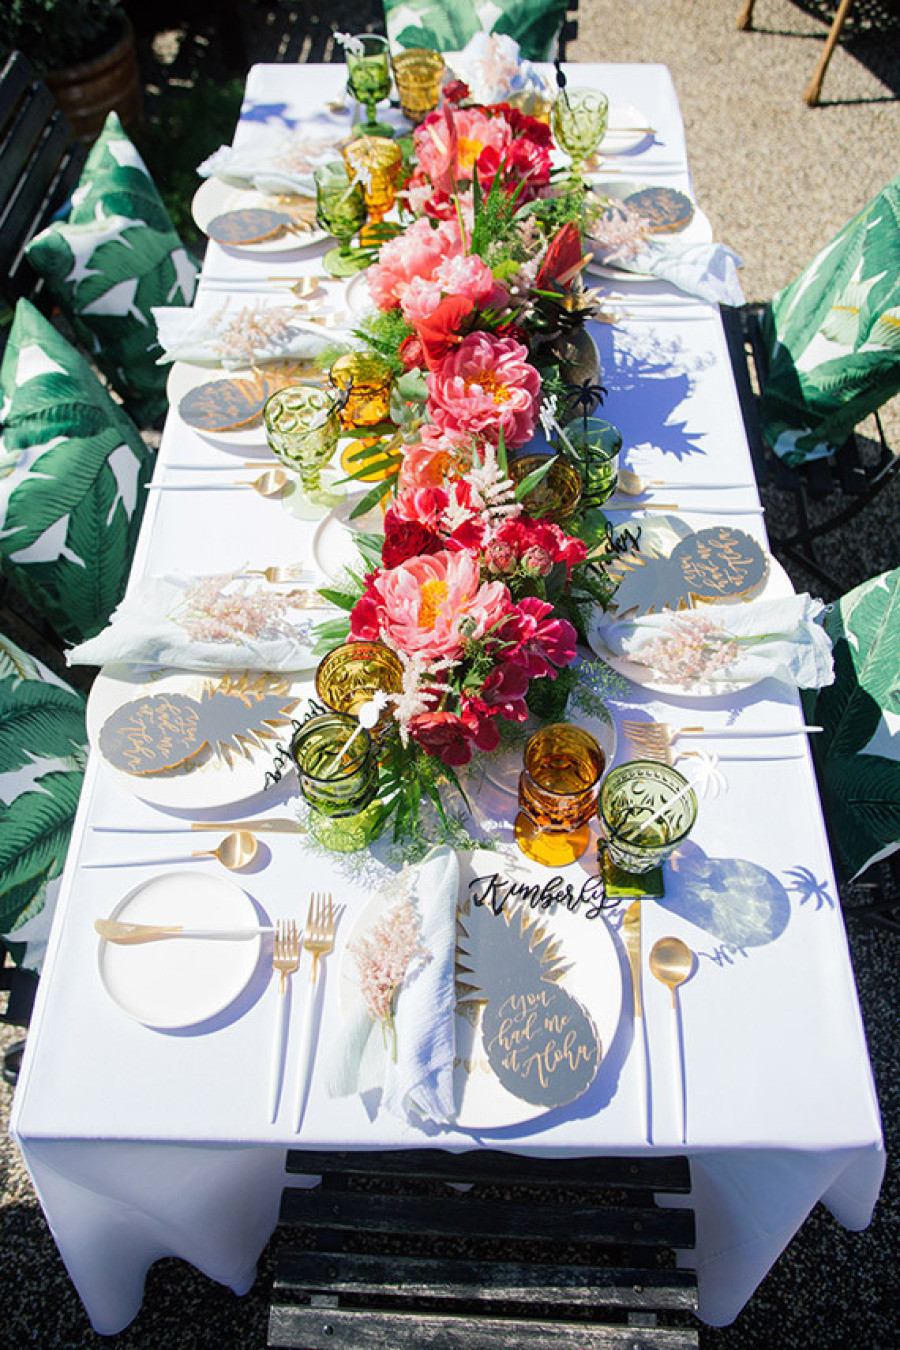 Flower Arrangement Ideas For Engagement Party
 50 Outdoor Party Ideas You Should Try Out This Summer